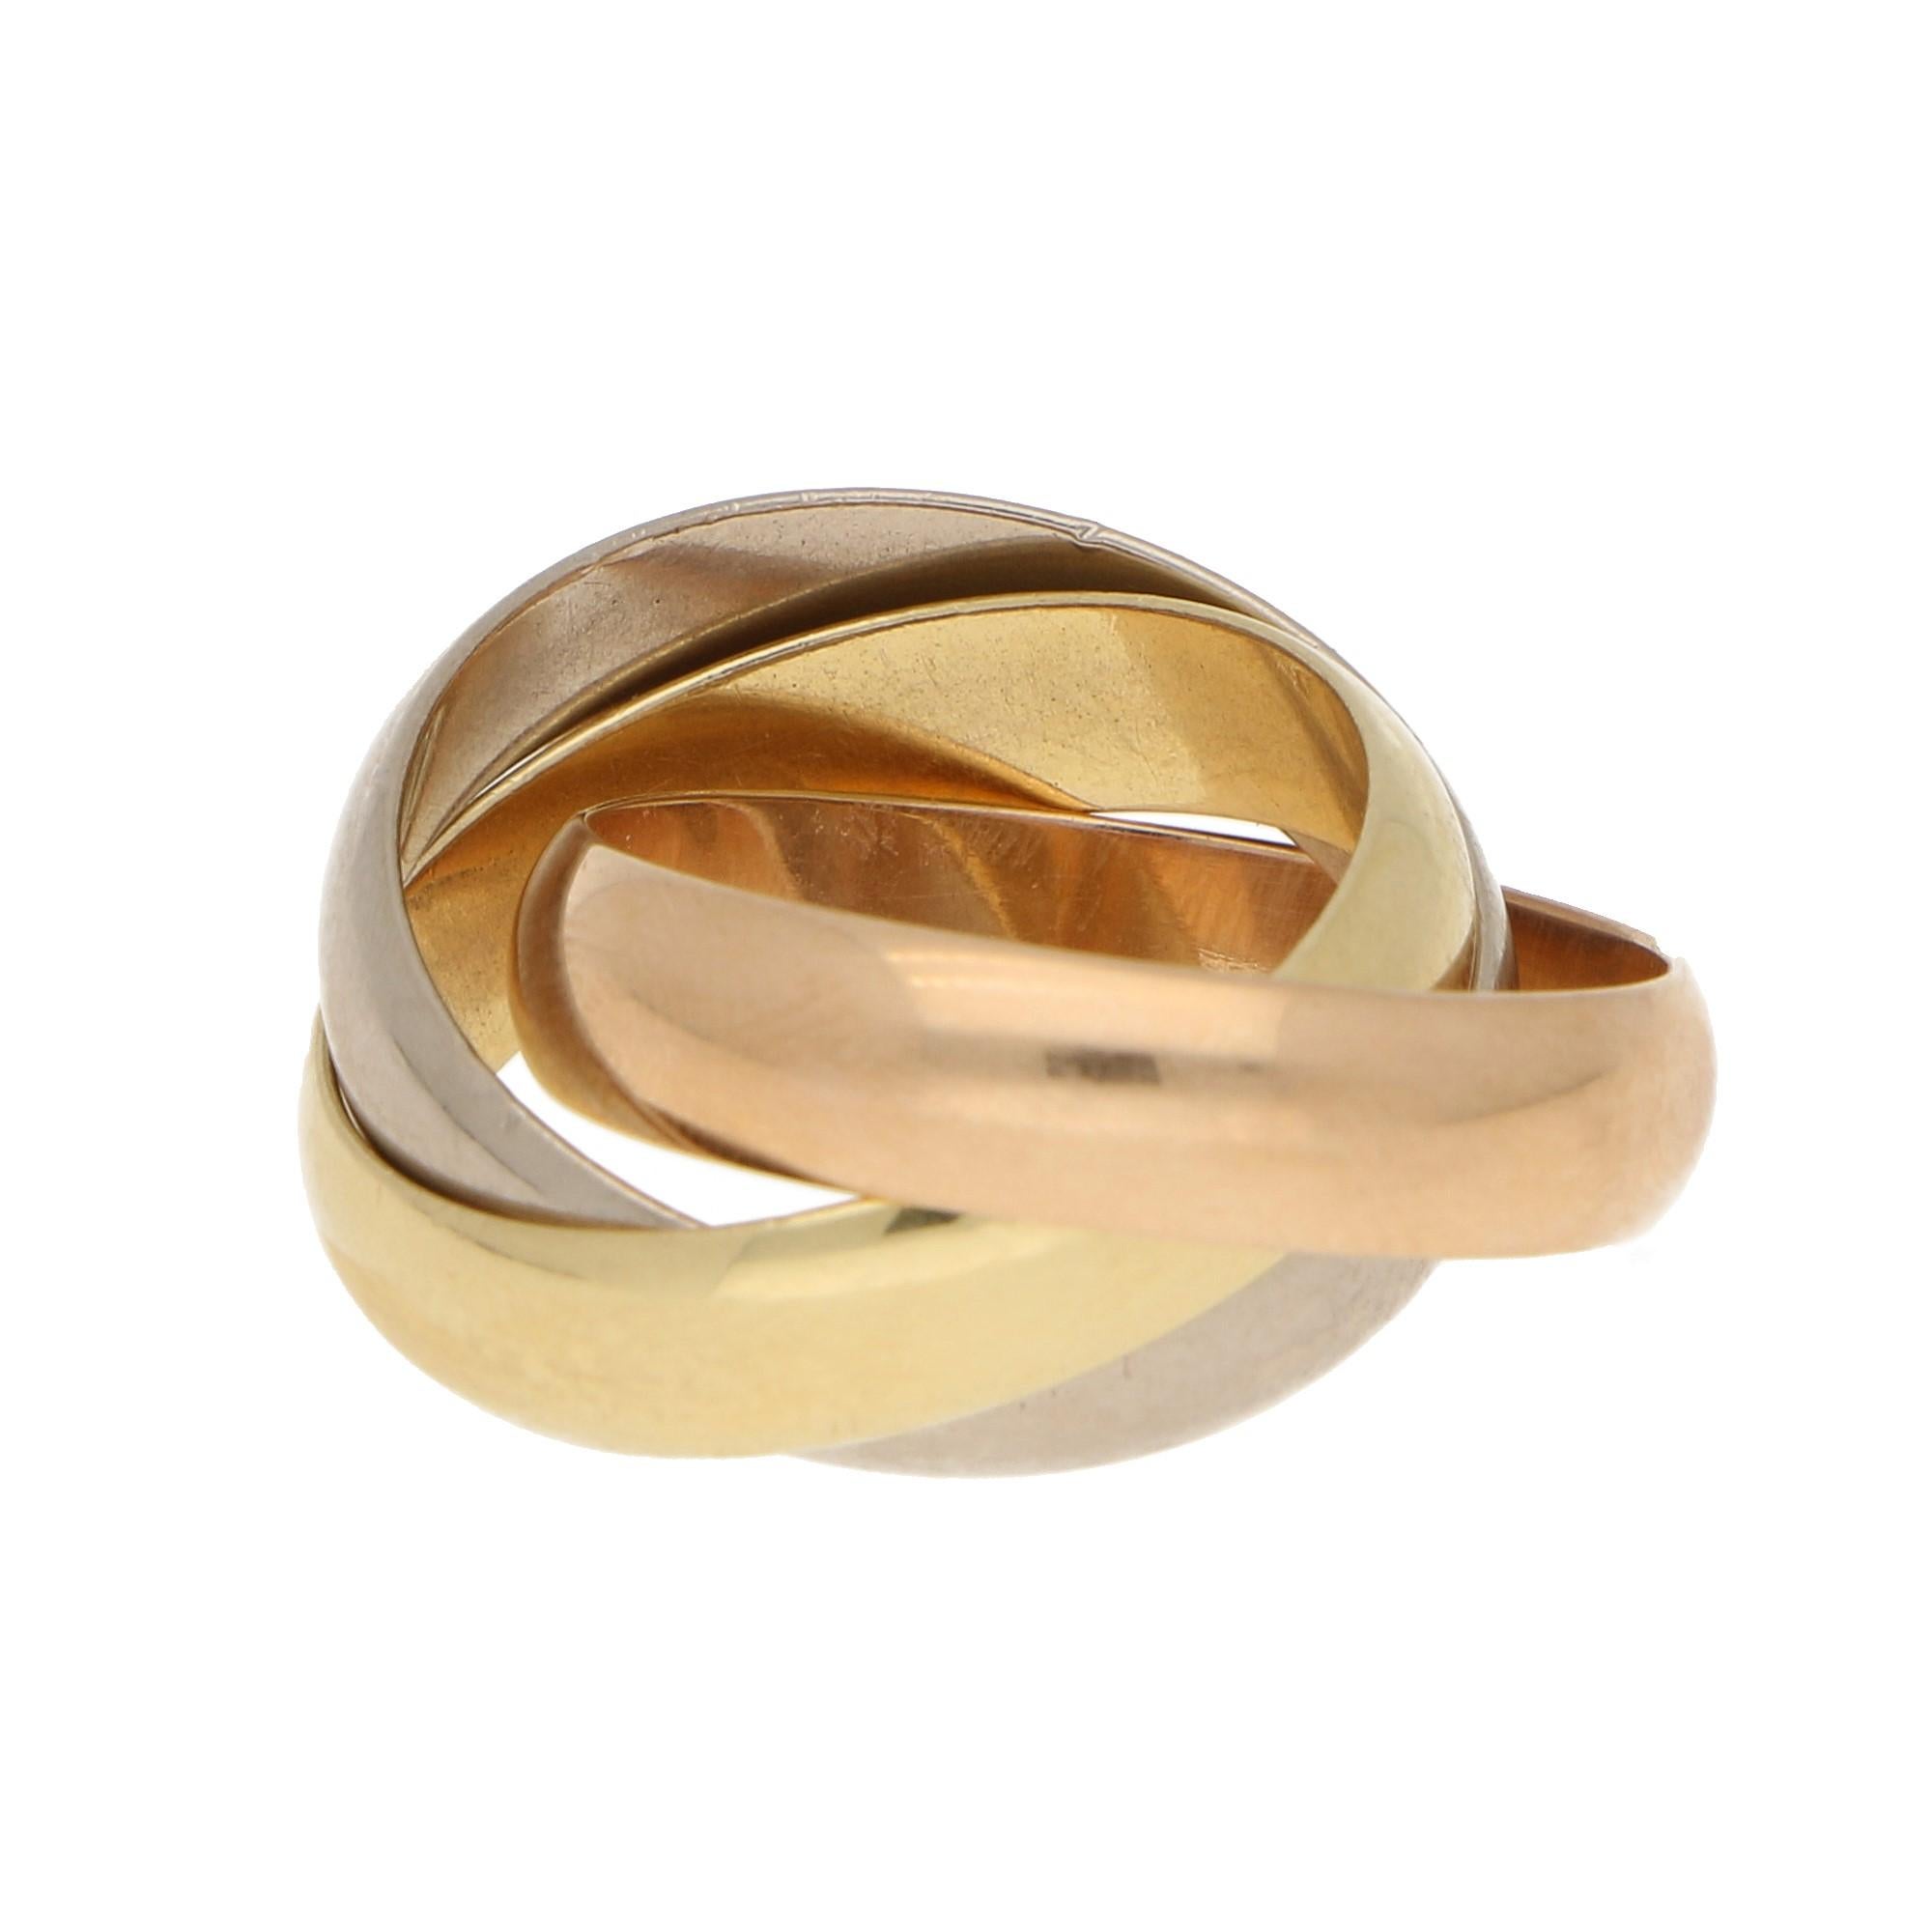 A classic from Cartier, this 3-band ring in 18-karat gold is composed of 1 yellow bands, 1 white band, and 1 rose band, the latter one engraved with “Cartier” on the outside. This ring is a US finger size 7-8. 
